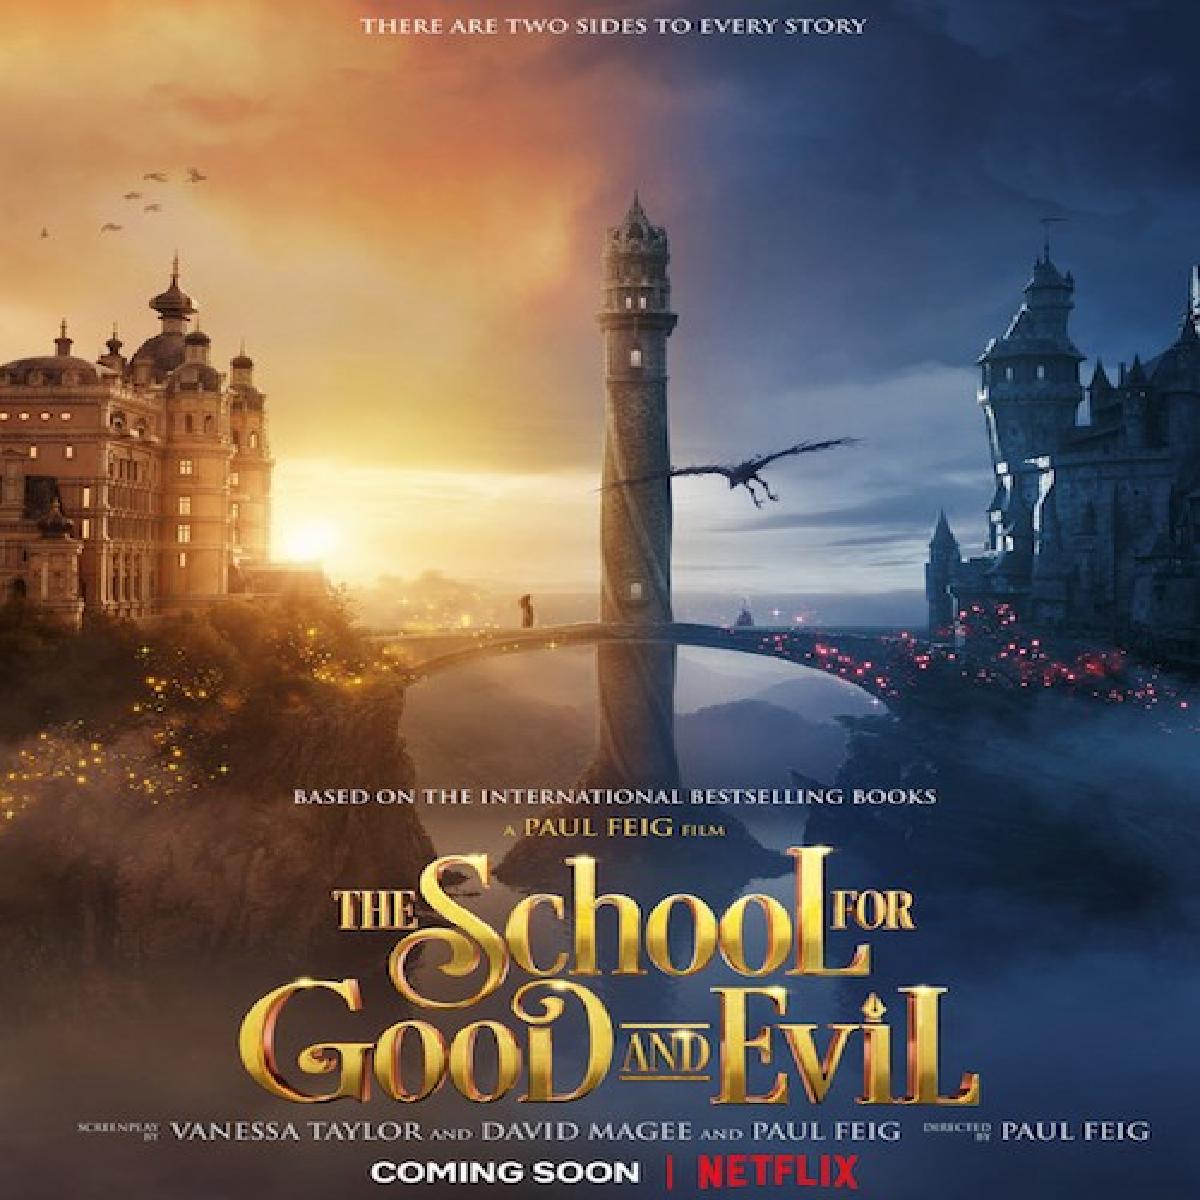 The School For Good And Evil Trailer Is Out